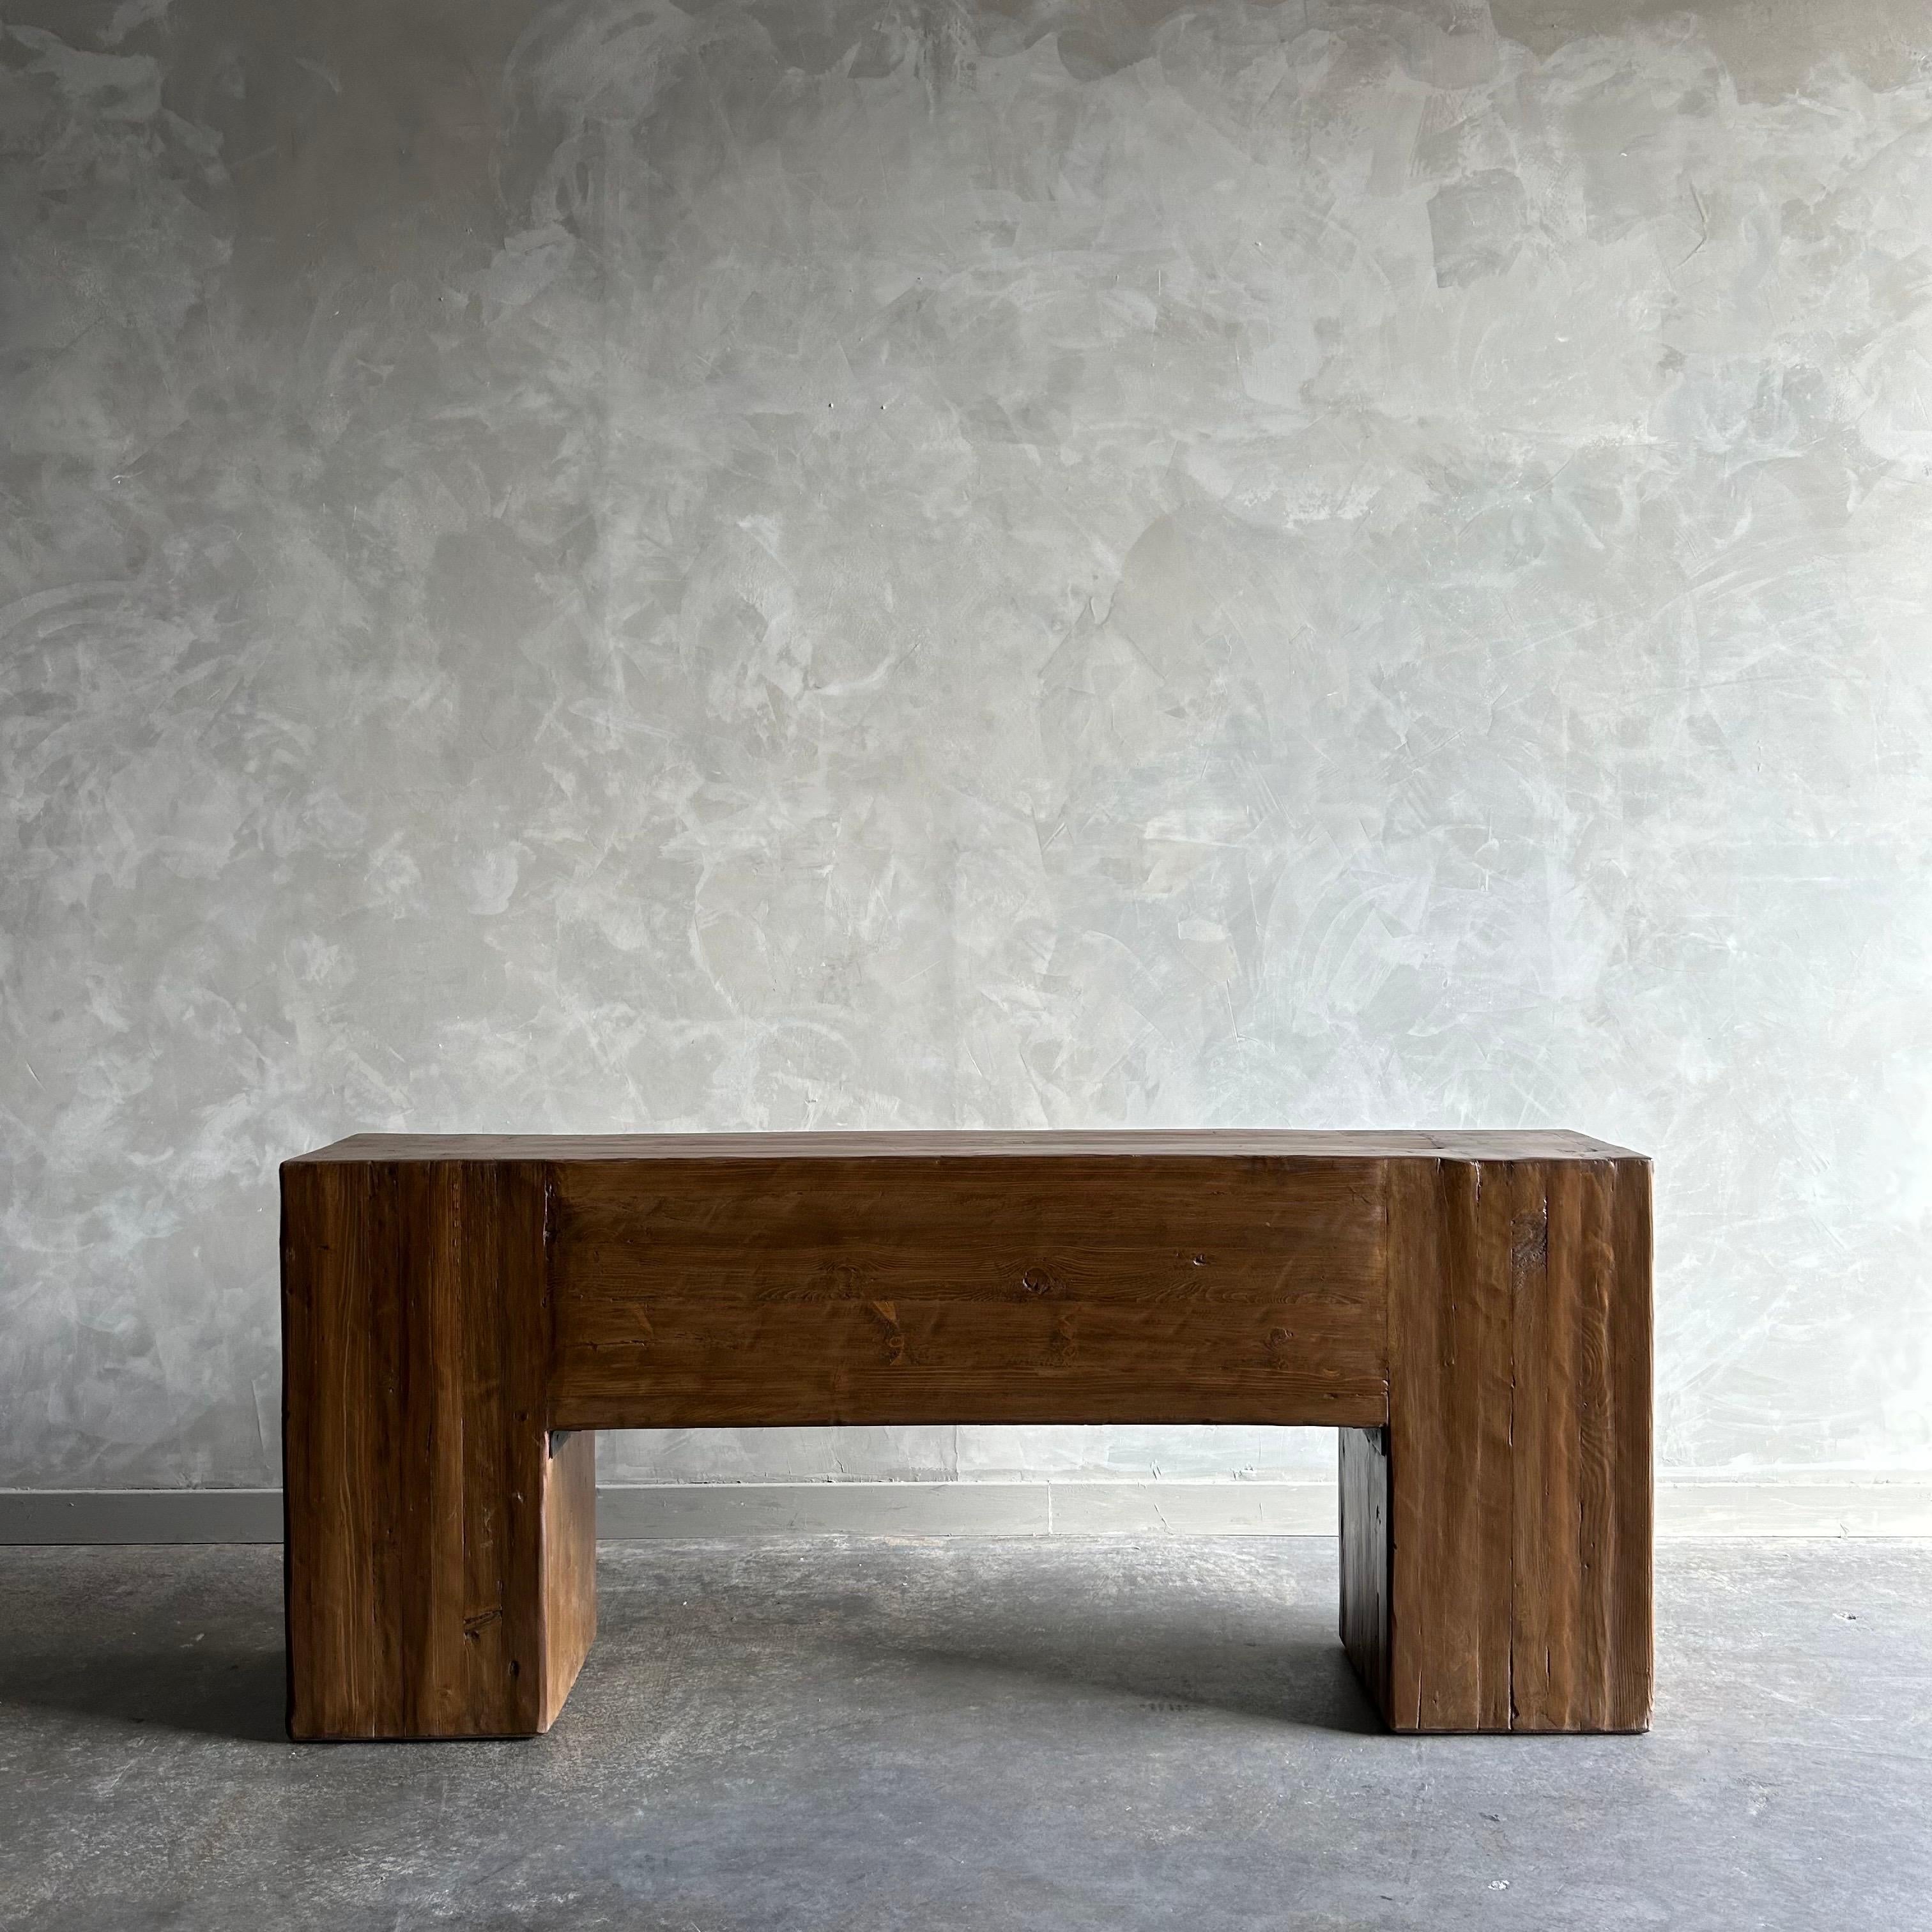 British beam console in walnut finish.
Made from reclaimed wood timbers
The artisanal construction methods of this console highlights the woods beautiful grain pattern & knots and fissures from its past life. The most authentic materials are hand